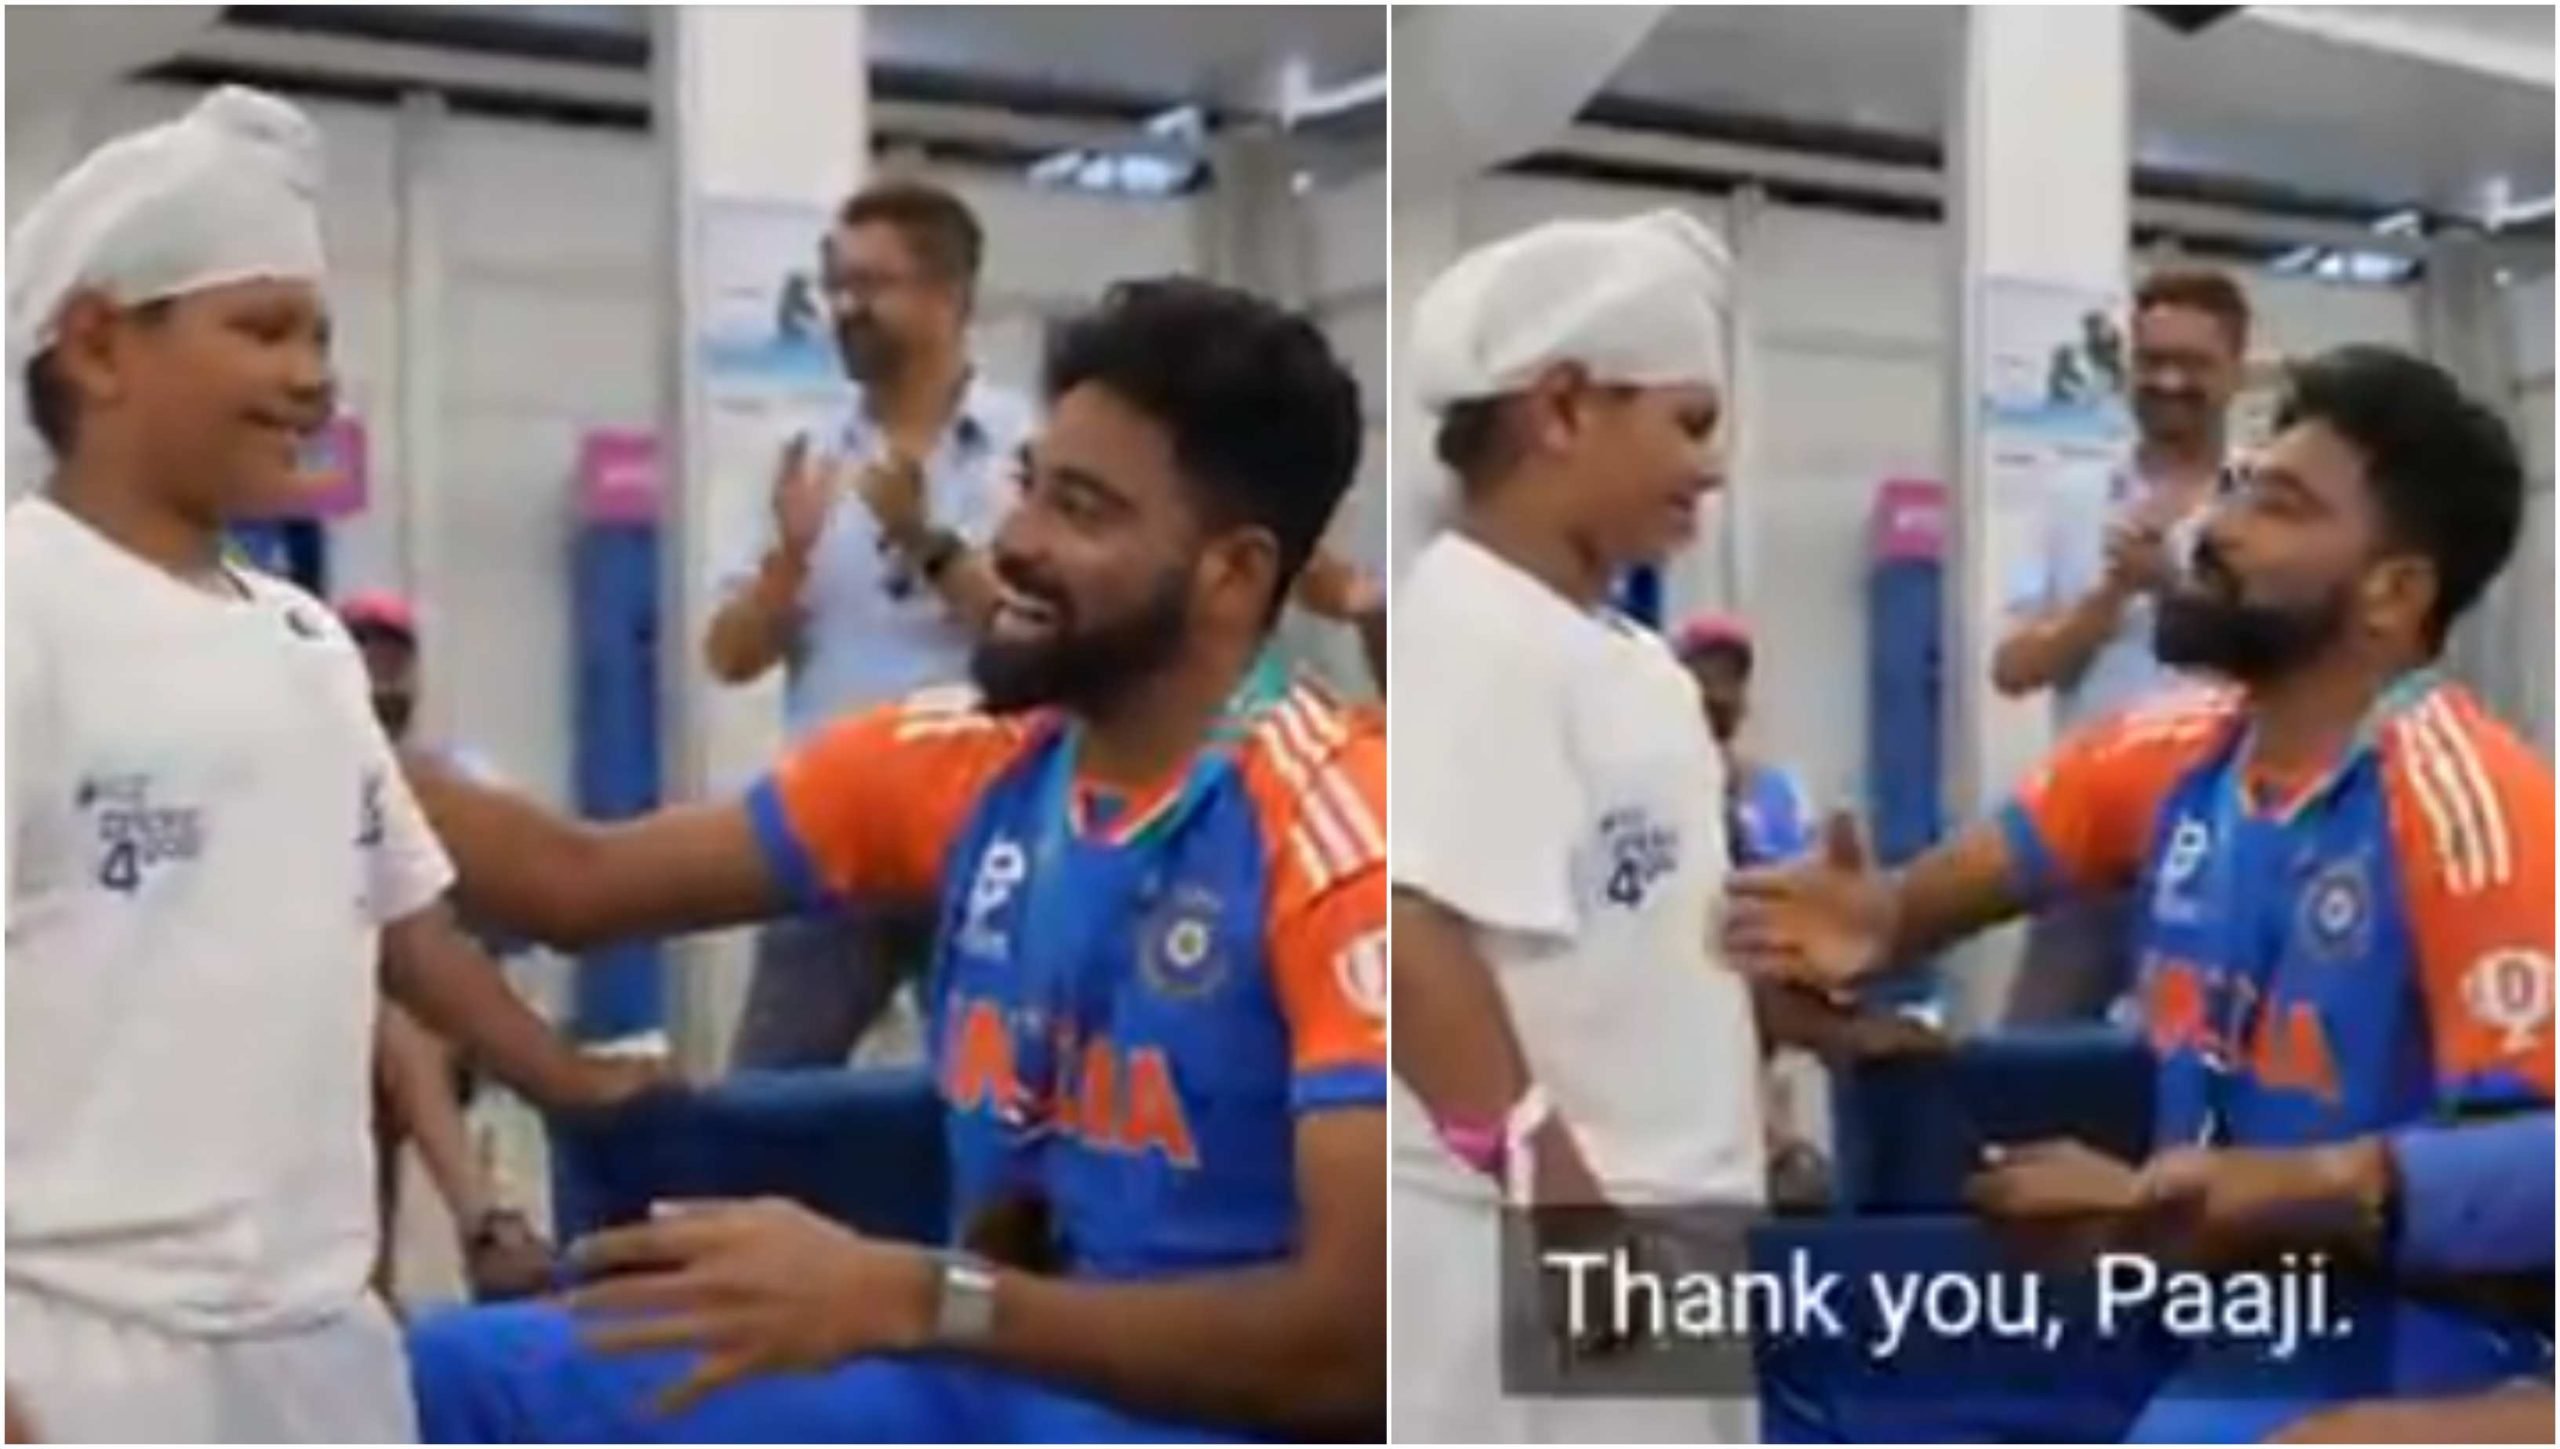 [WATCH]: Mohammed Siraj Gets ‘Best Fielder’ Award, Collects The Medal From A Young Fan After IND vs IRE Match